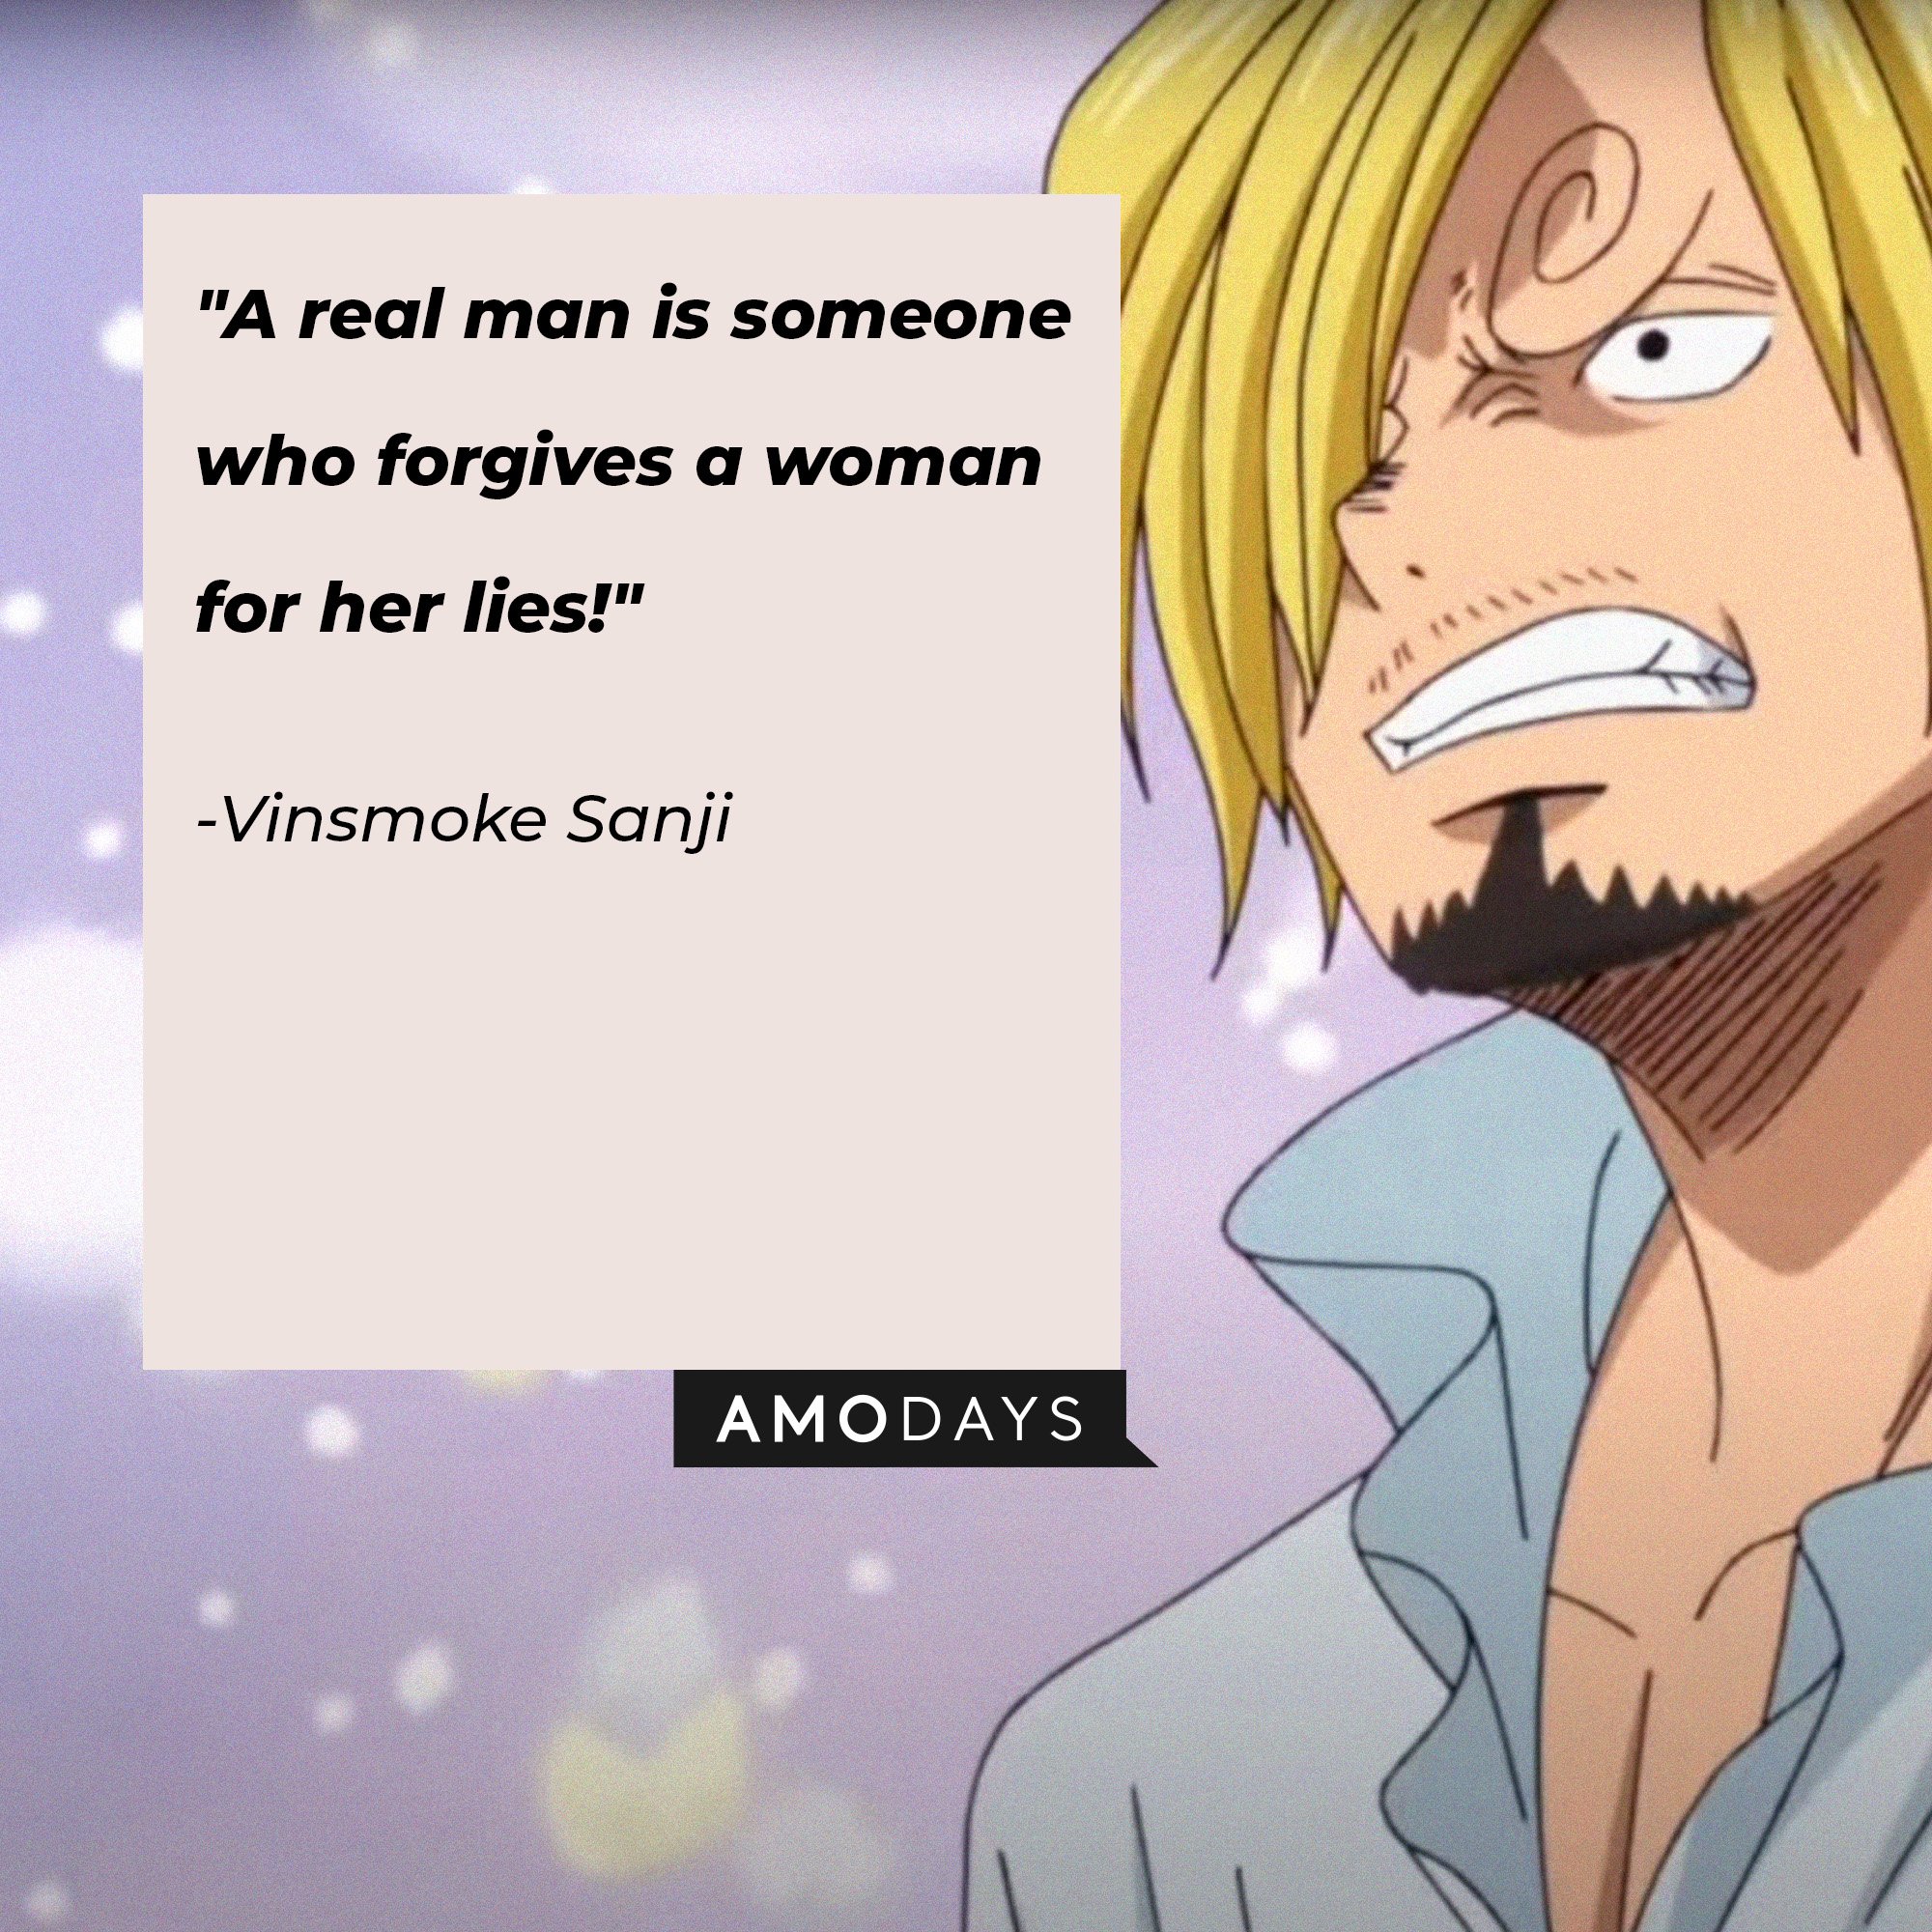  Vinsmoke Sanji's quote: "A real man is someone who forgives a woman for her lies!" | Image: AmoDays